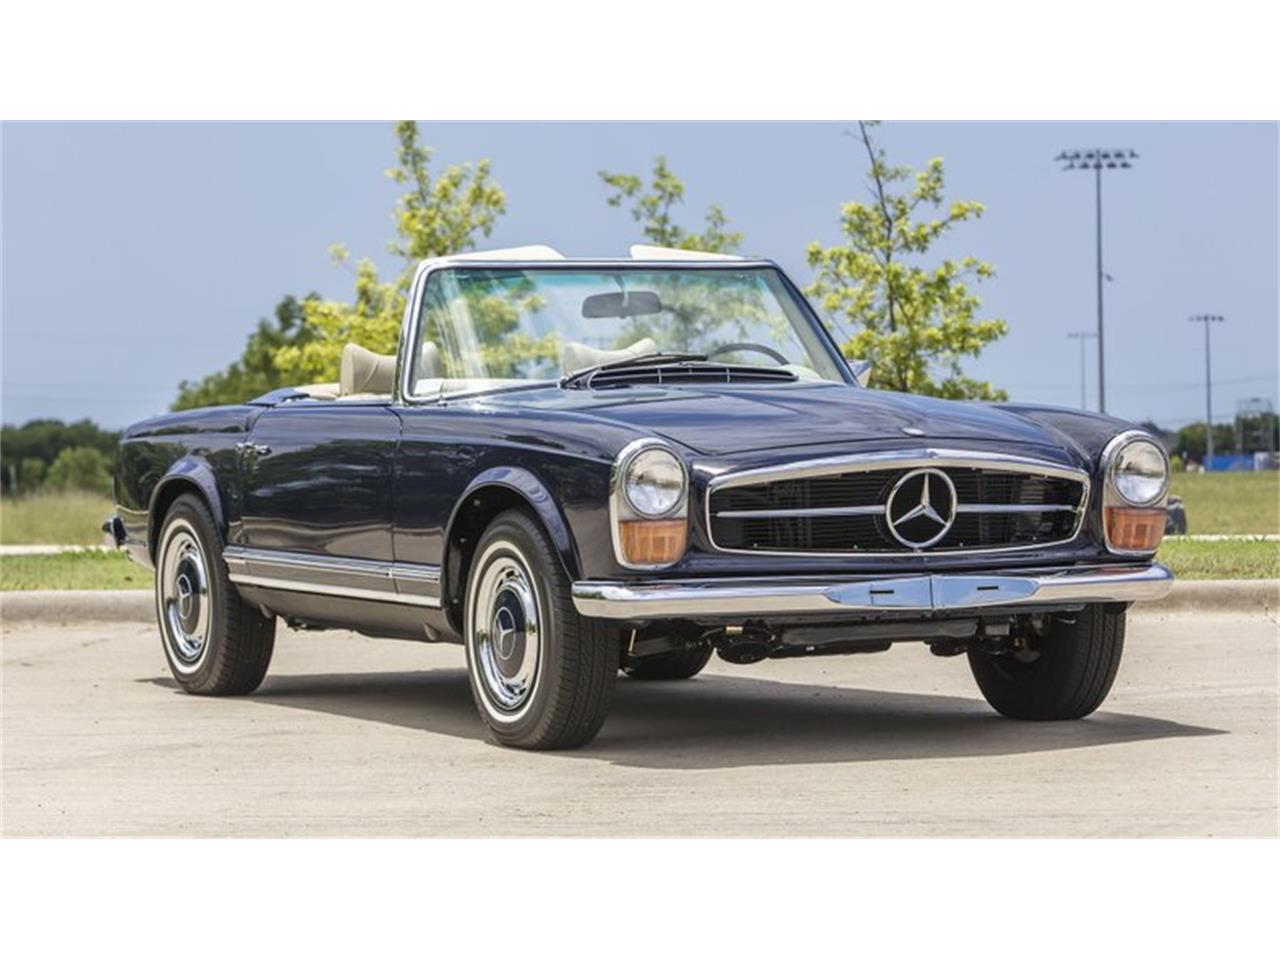 For Sale at Auction: 1969 Mercedes-Benz 280 in Monterey, California for sale in Monterey, CA